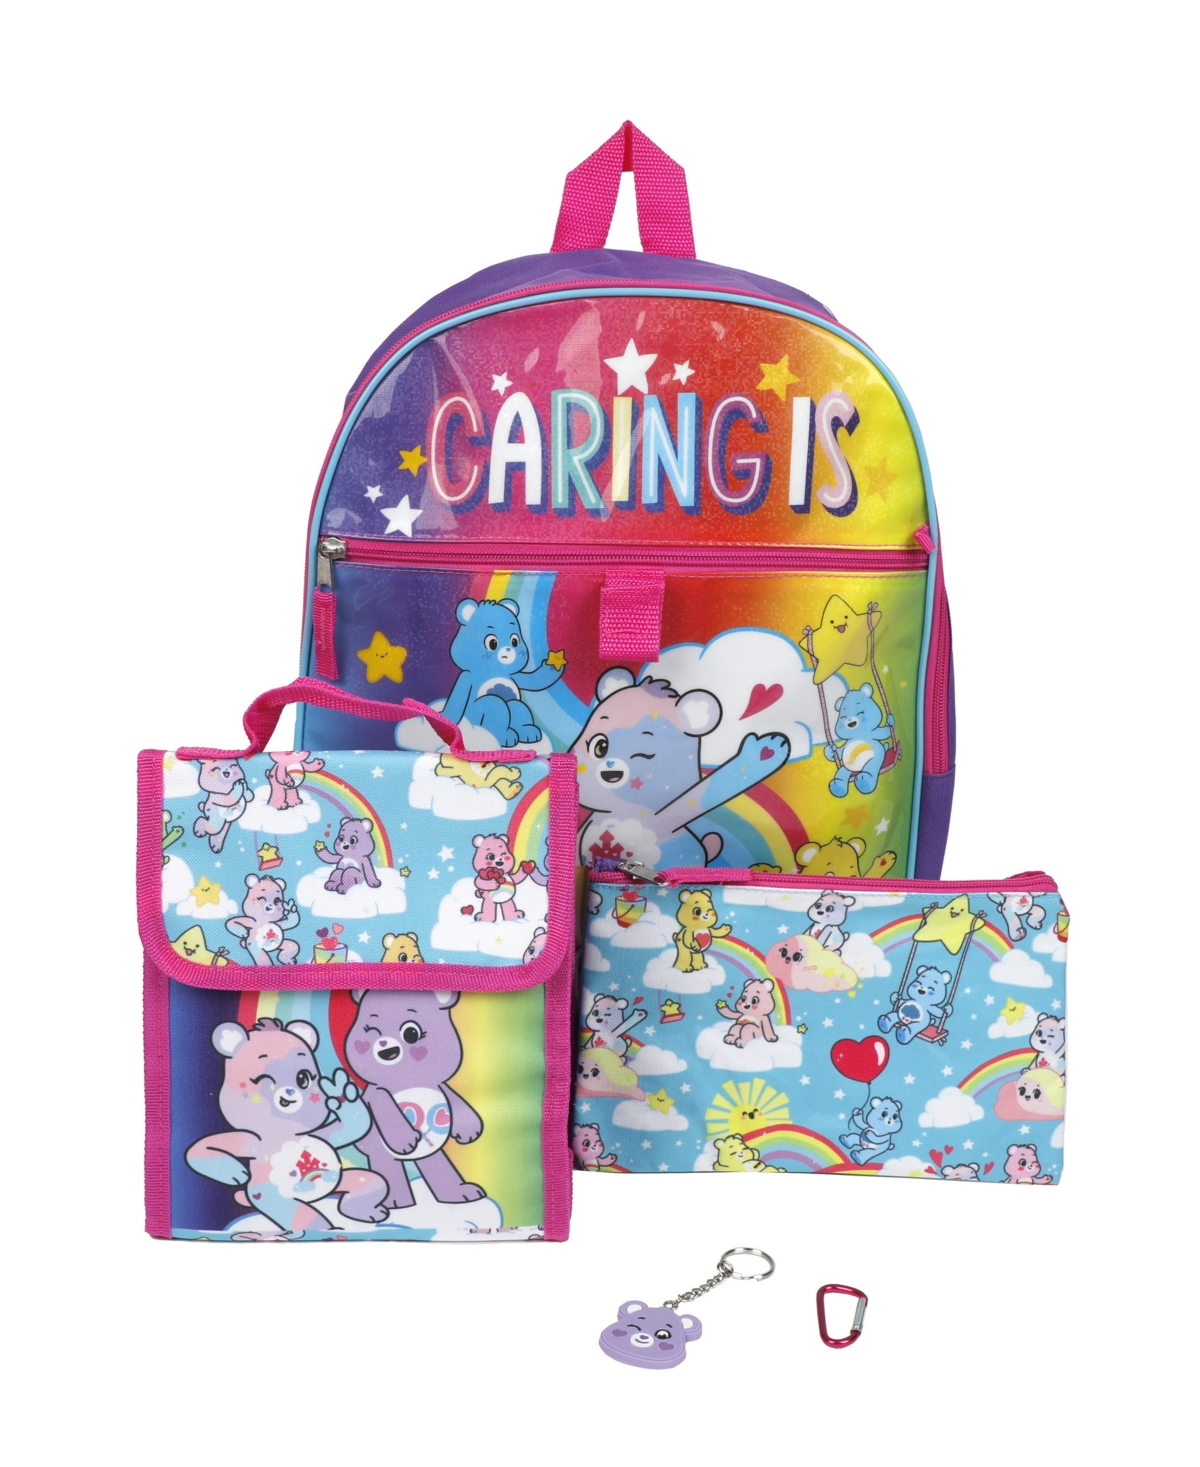 5-Pc Bioworld Kids' Care Bears Backpack Set w/ Lunch Bag & Utility Case (Purple) $14.65 + Free Store Pickup at Macy's or FS on $25+